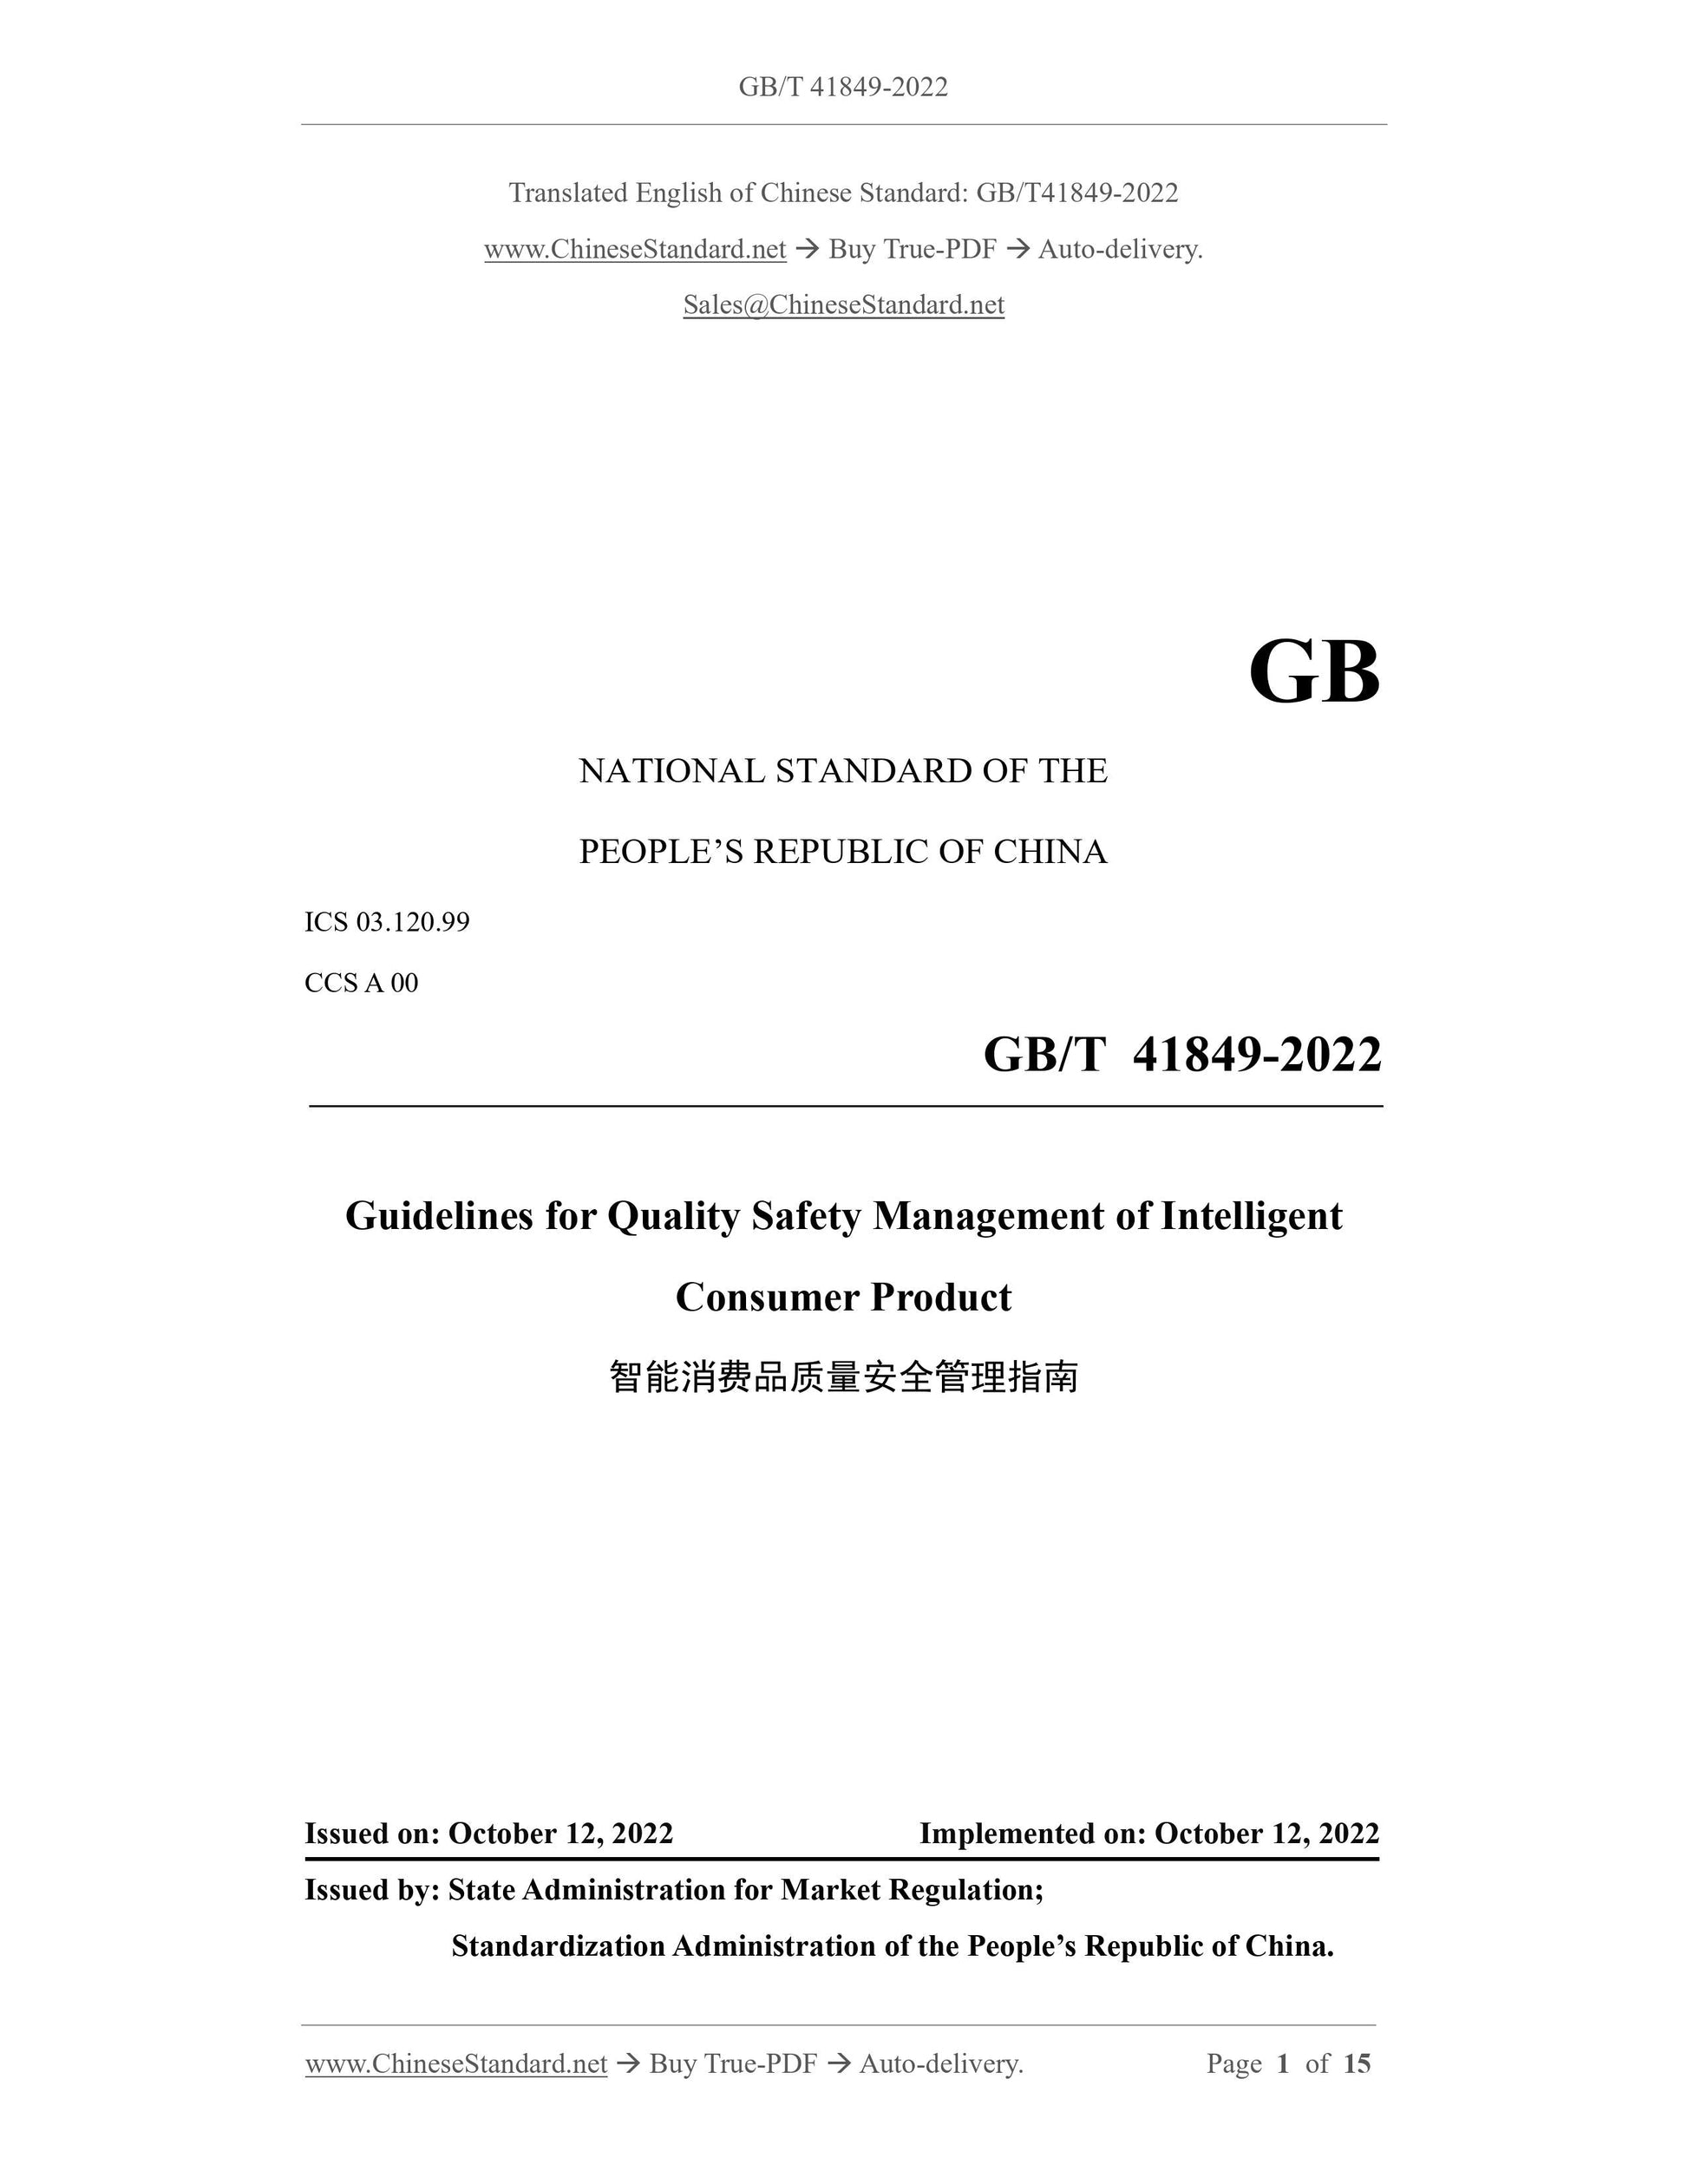 GB/T 41849-2022 Page 1